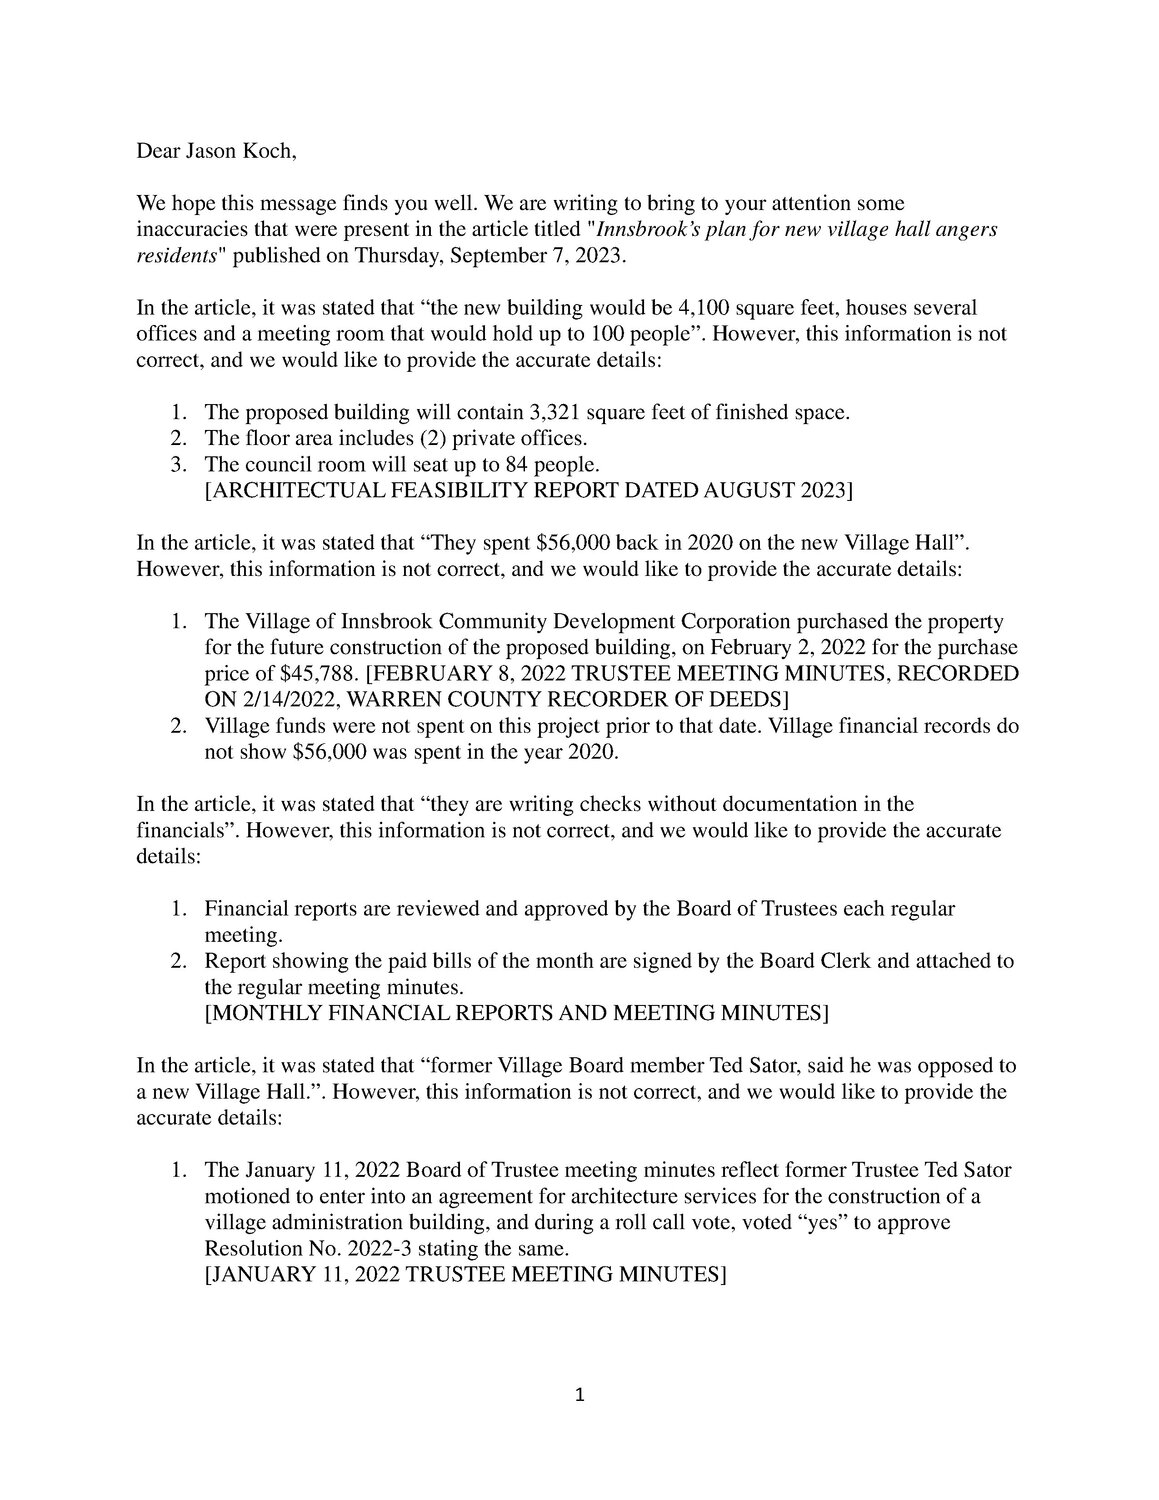 This document was sent to The Warren County Record on Sept. 8, the day after the story was published in both print and online, to address what the village believes are inaccuracies in the story.